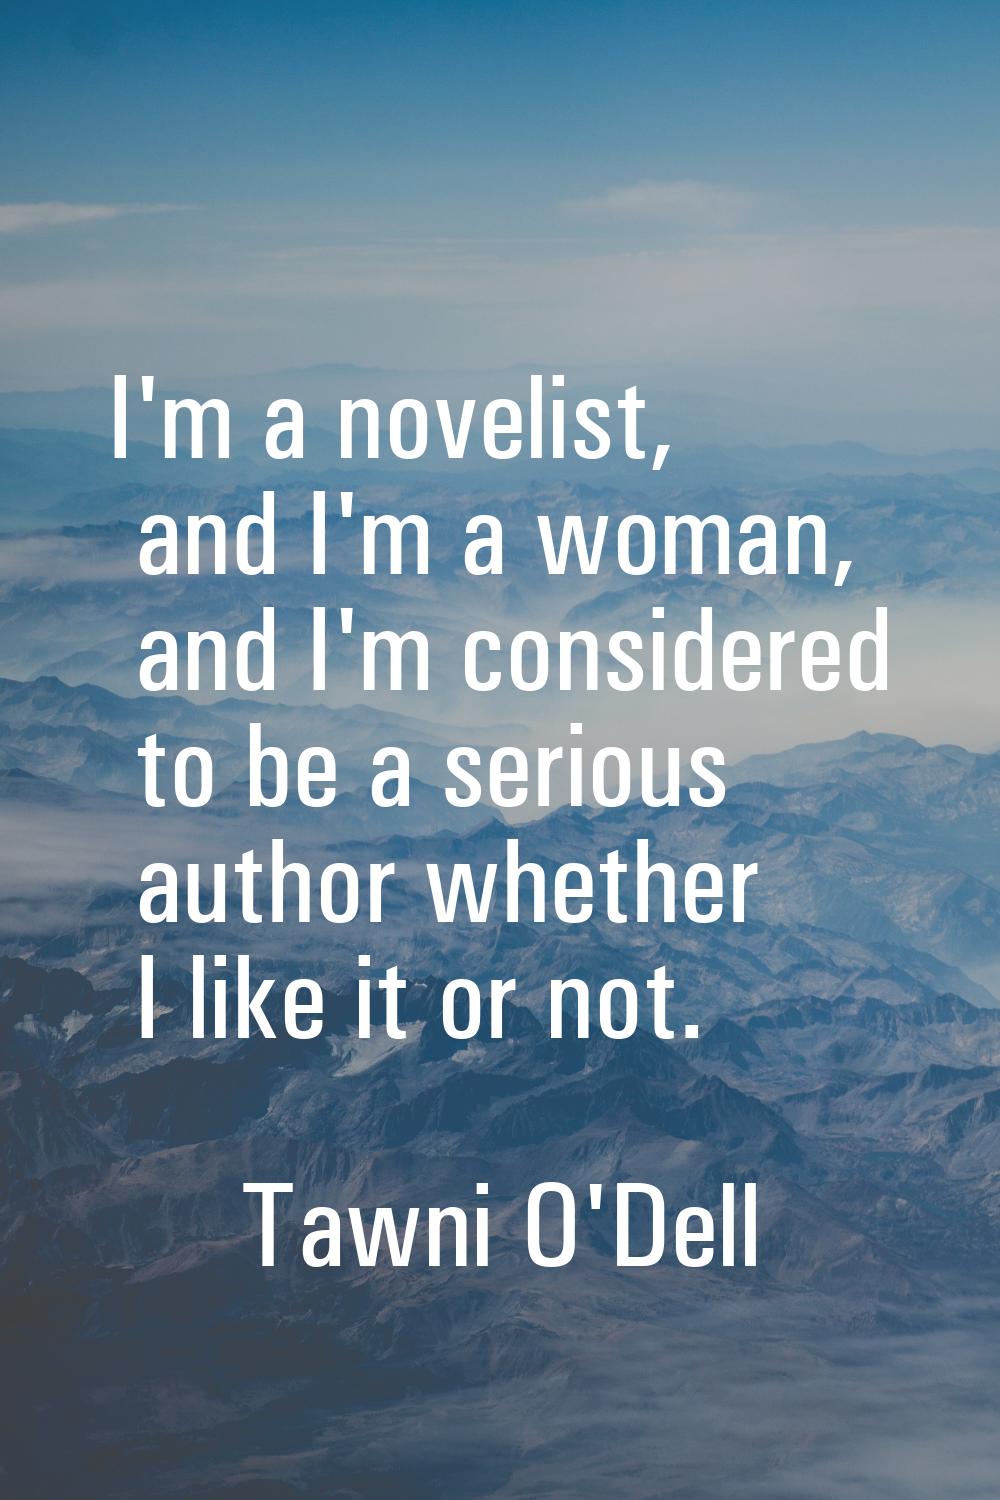 I'm a novelist, and I'm a woman, and I'm considered to be a serious author whether I like it or not